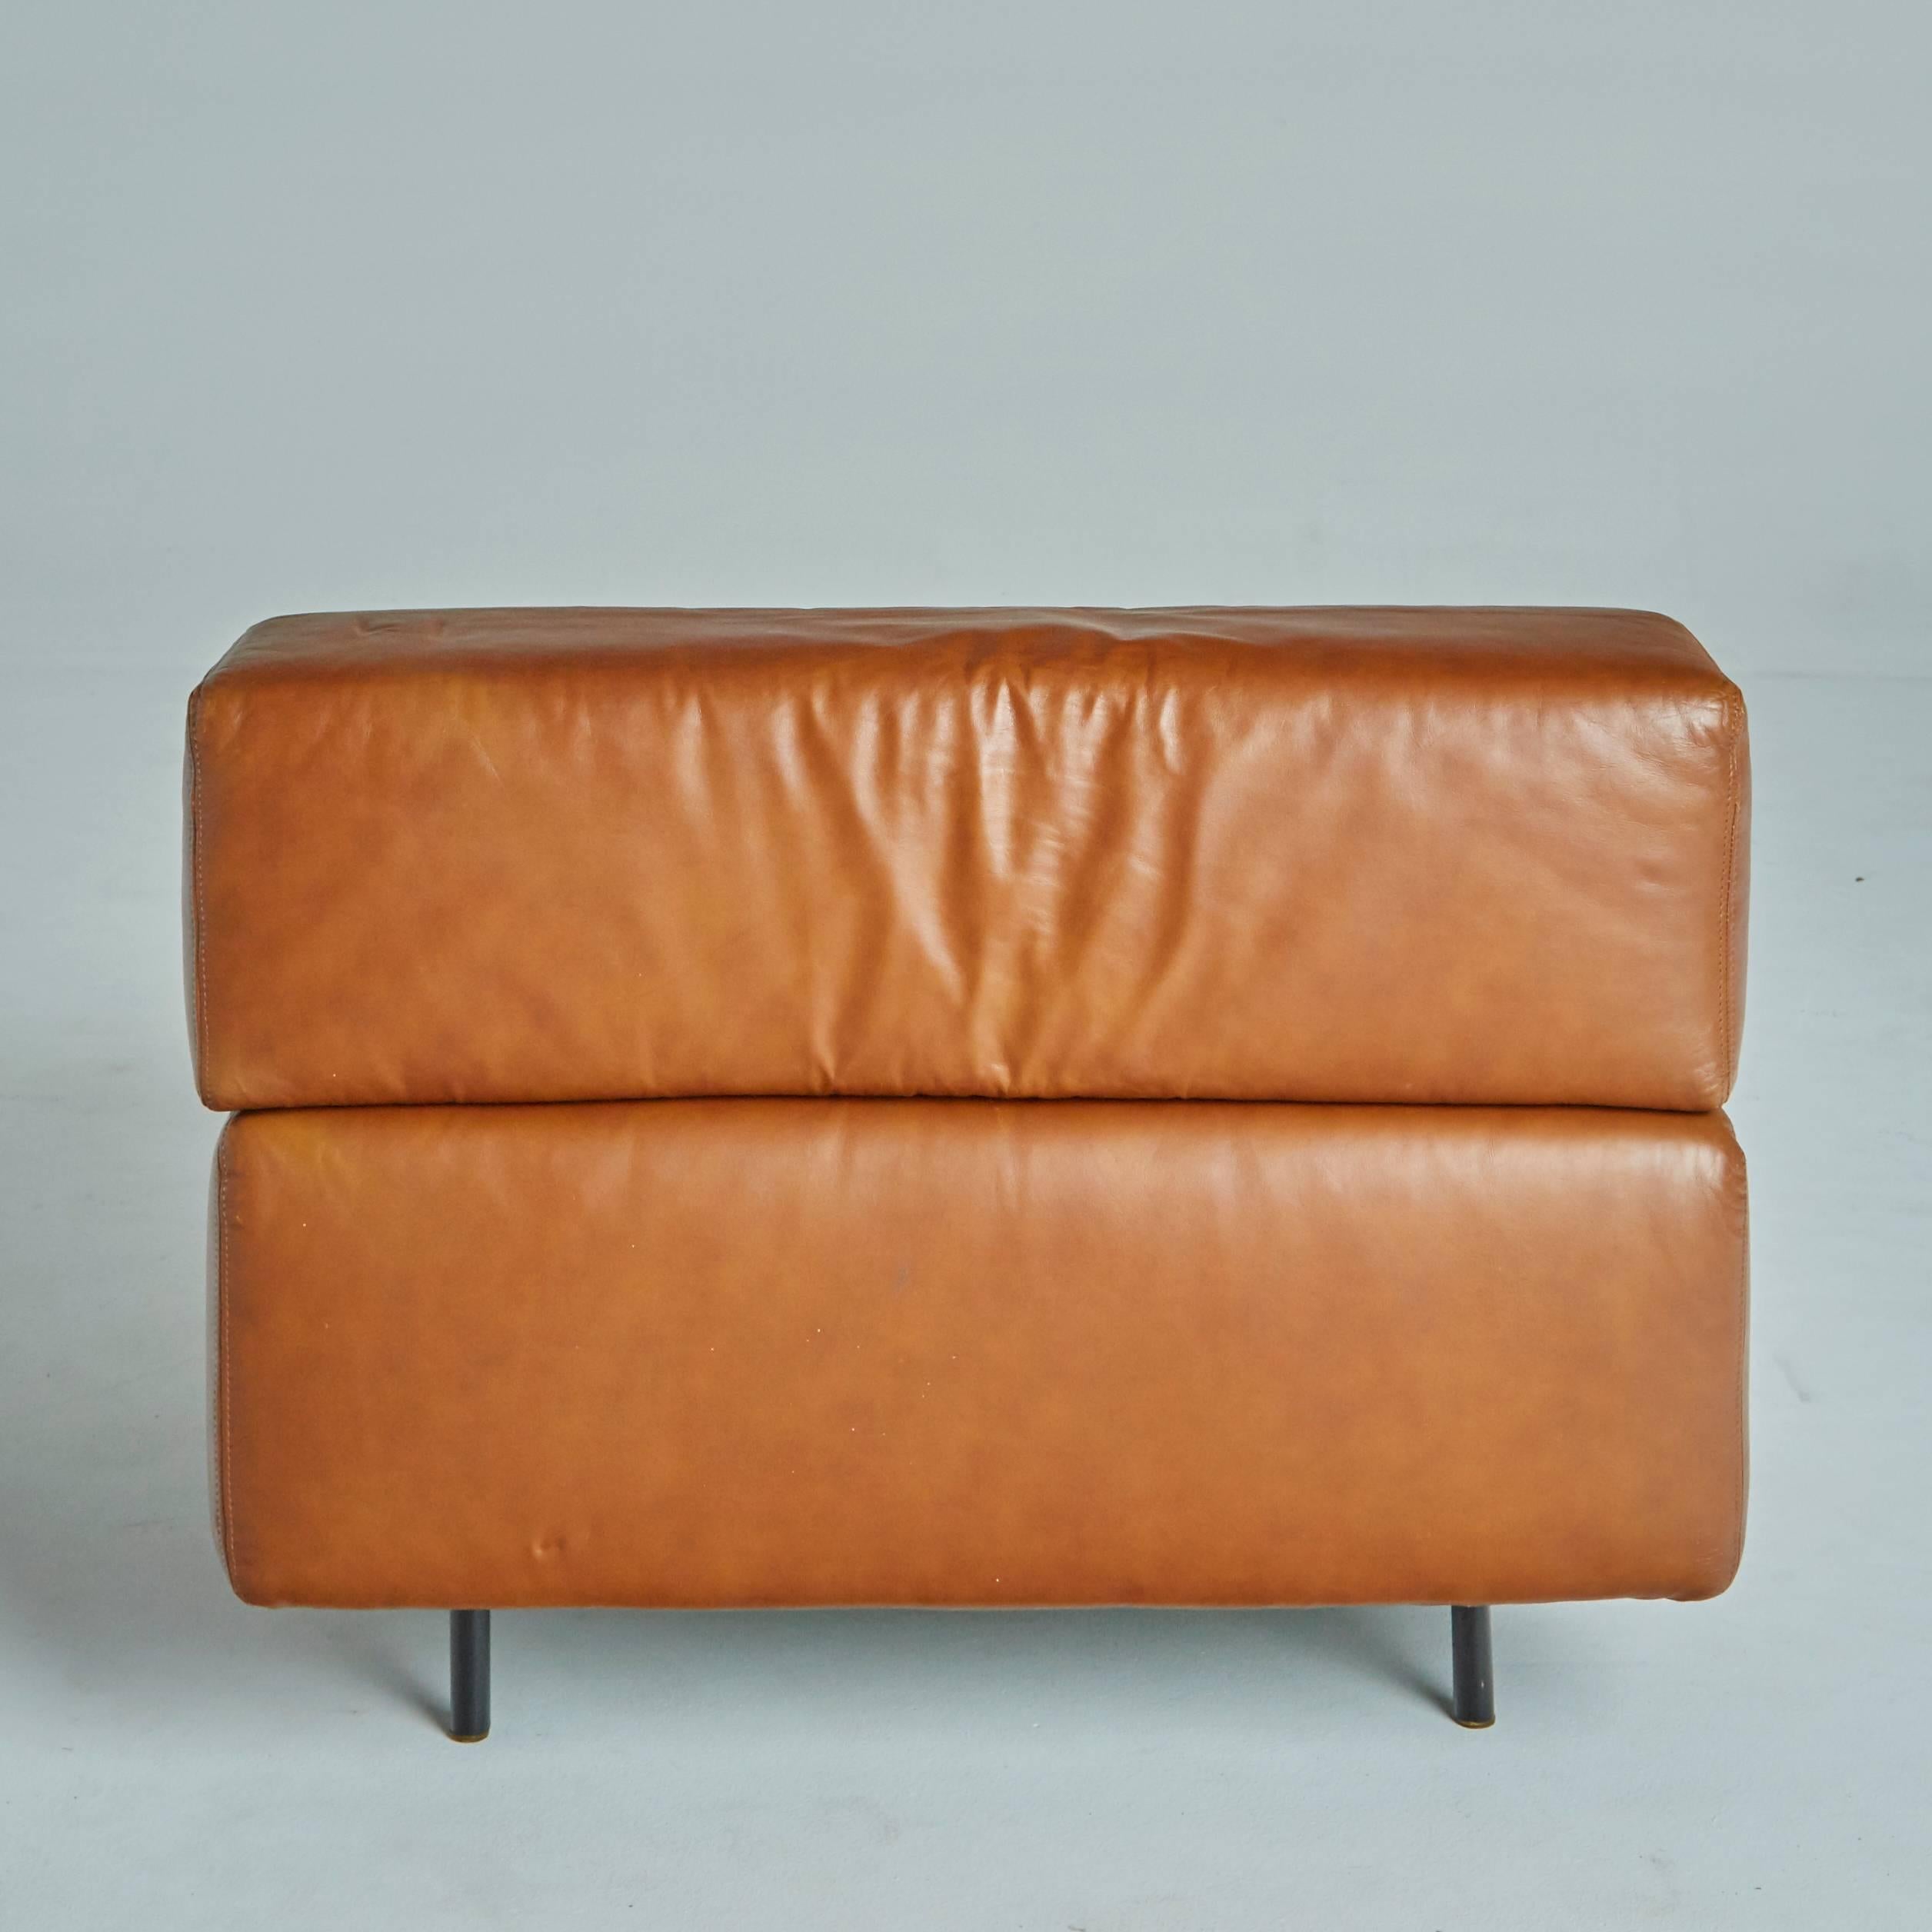 Mid-20th Century Harvey Probber 'Cubo' Leather Sectional Sofa or Lounge Chairs, Set of 4 (Four)